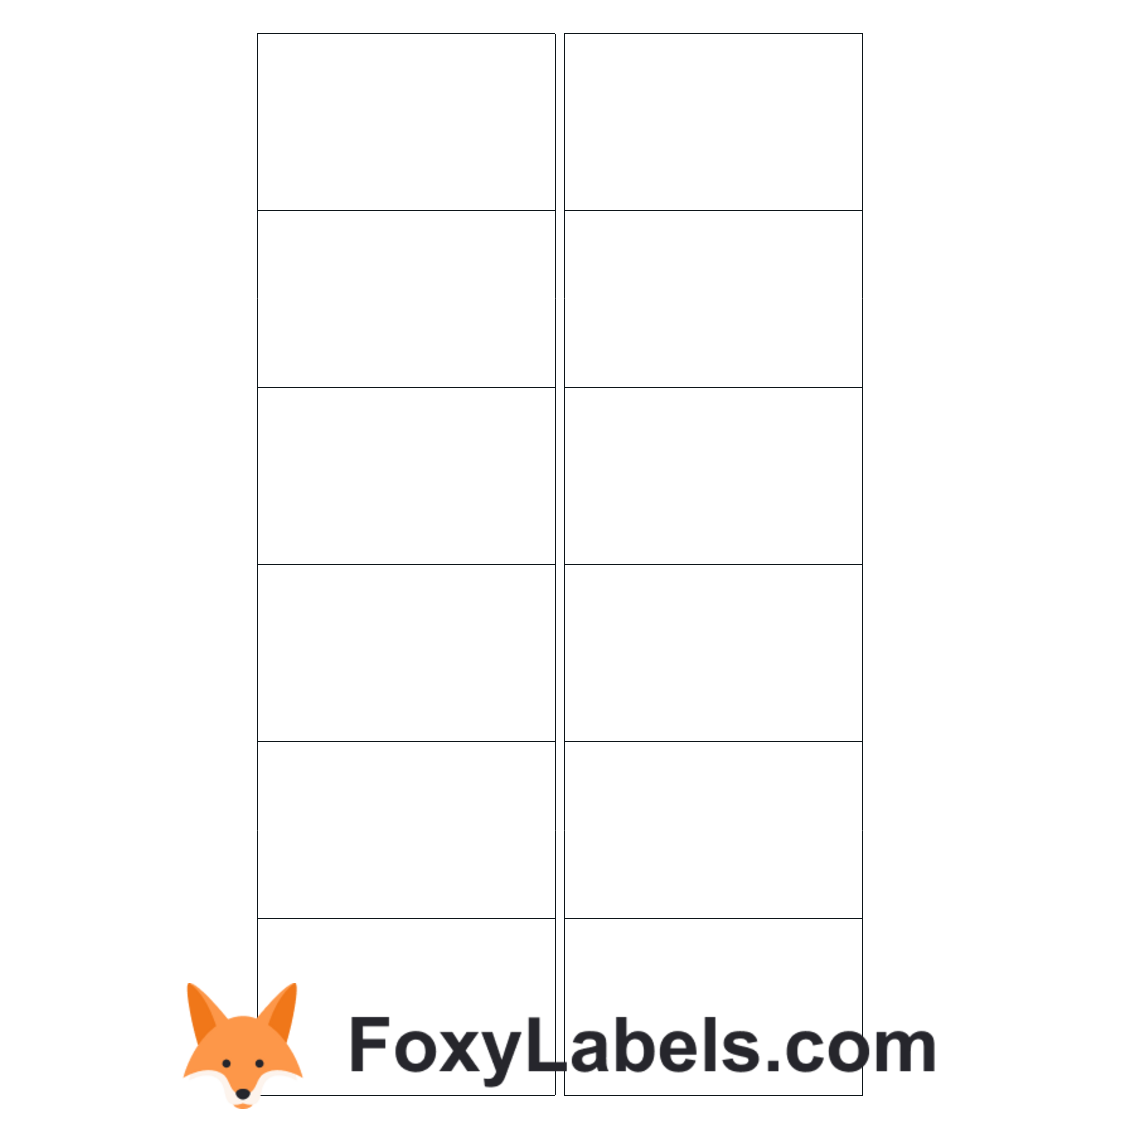 Avery-Zweckform L4742 label template for Google Docs